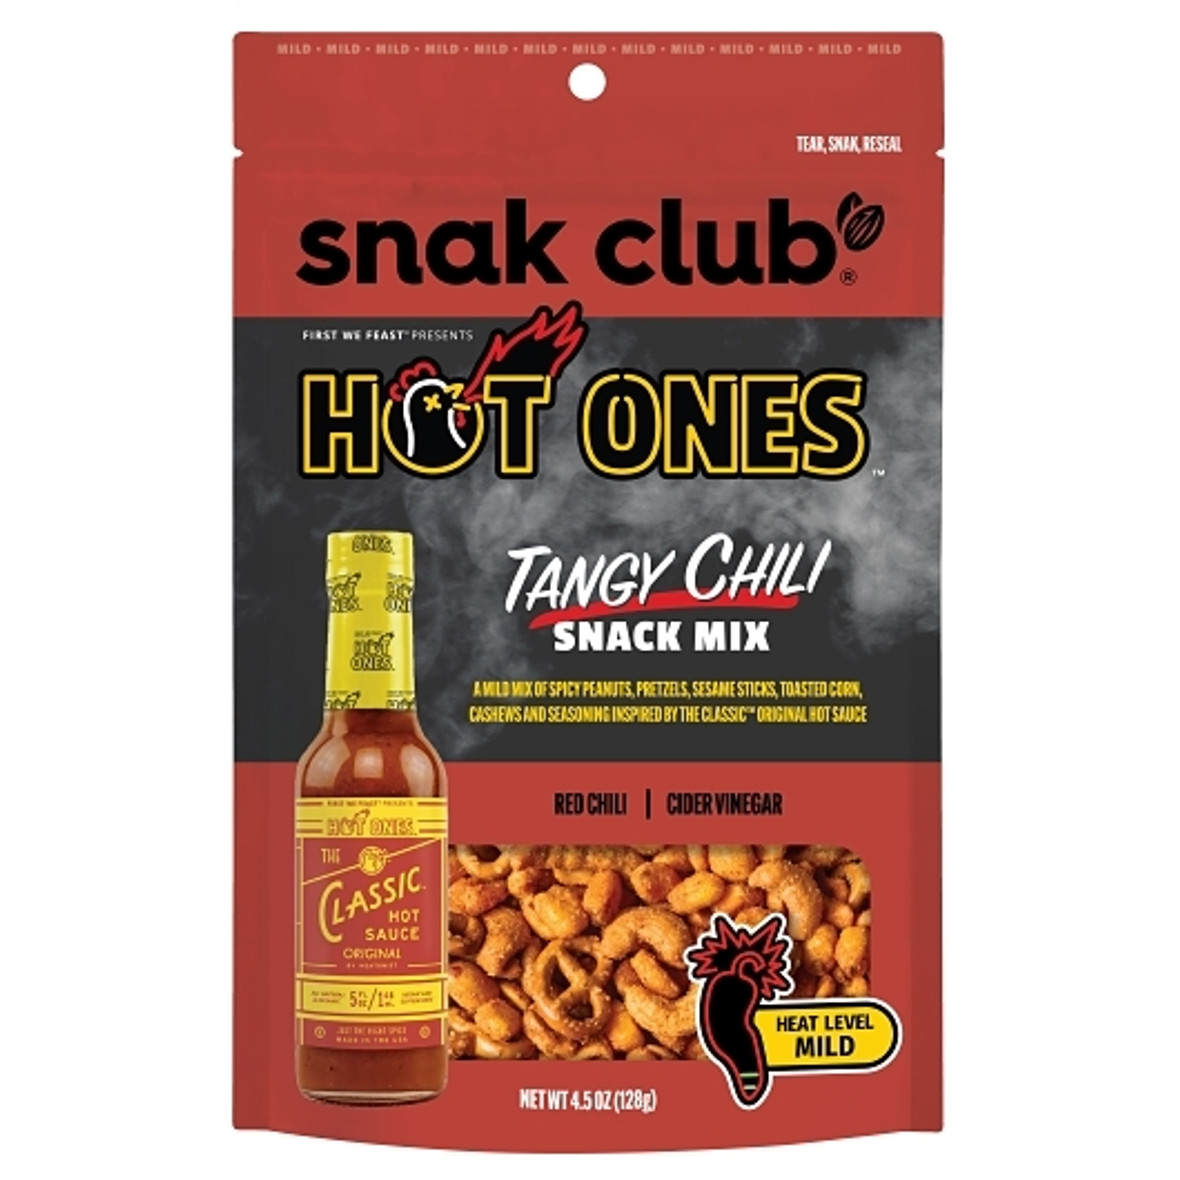 Snak Club Hot Ones Tangy Chili Snack Mix, 4.5 Ounce, 6 Per Case